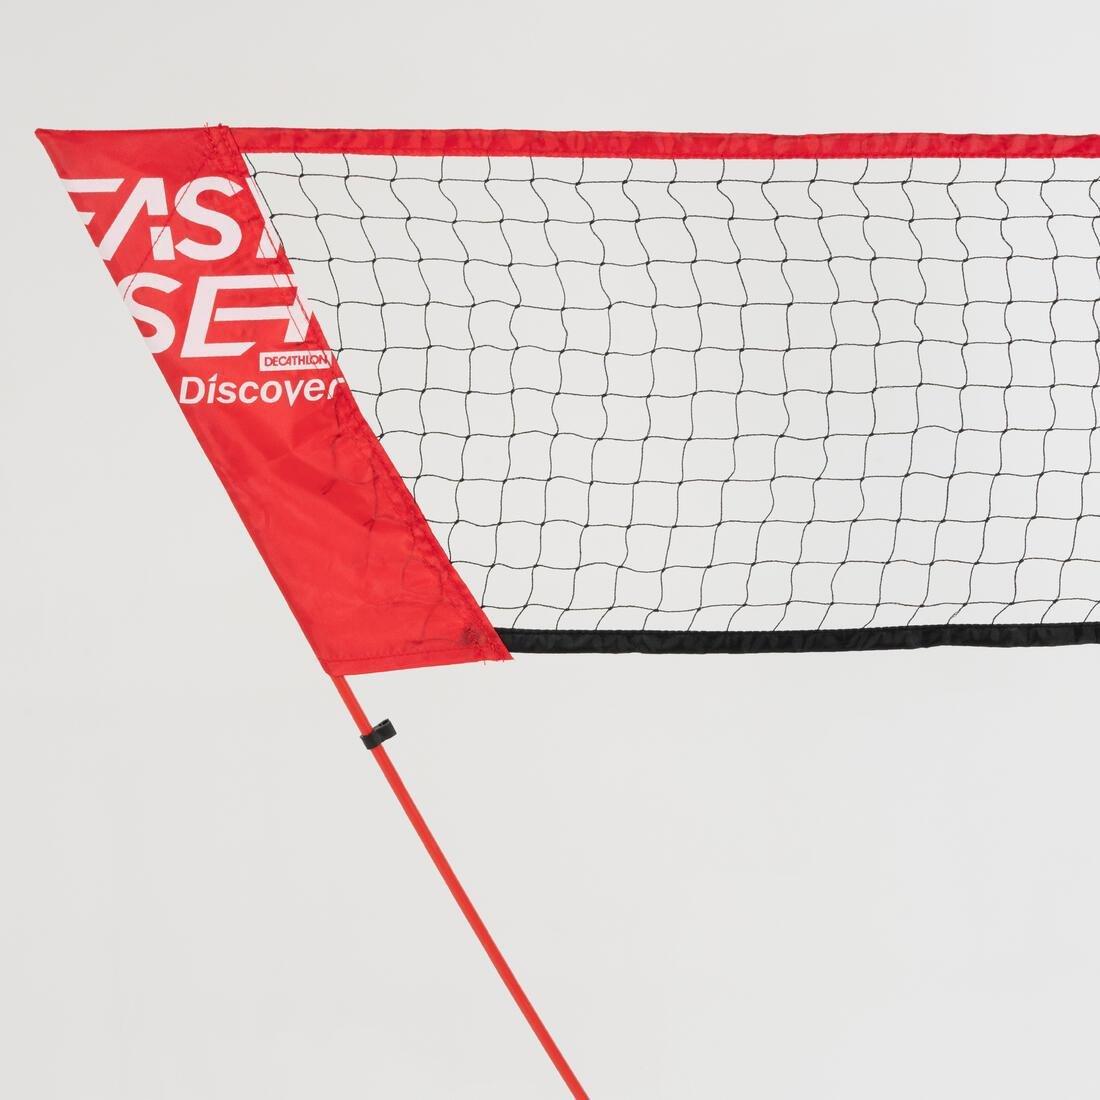 PERFLY - Badminton Easy Set Discover, Red